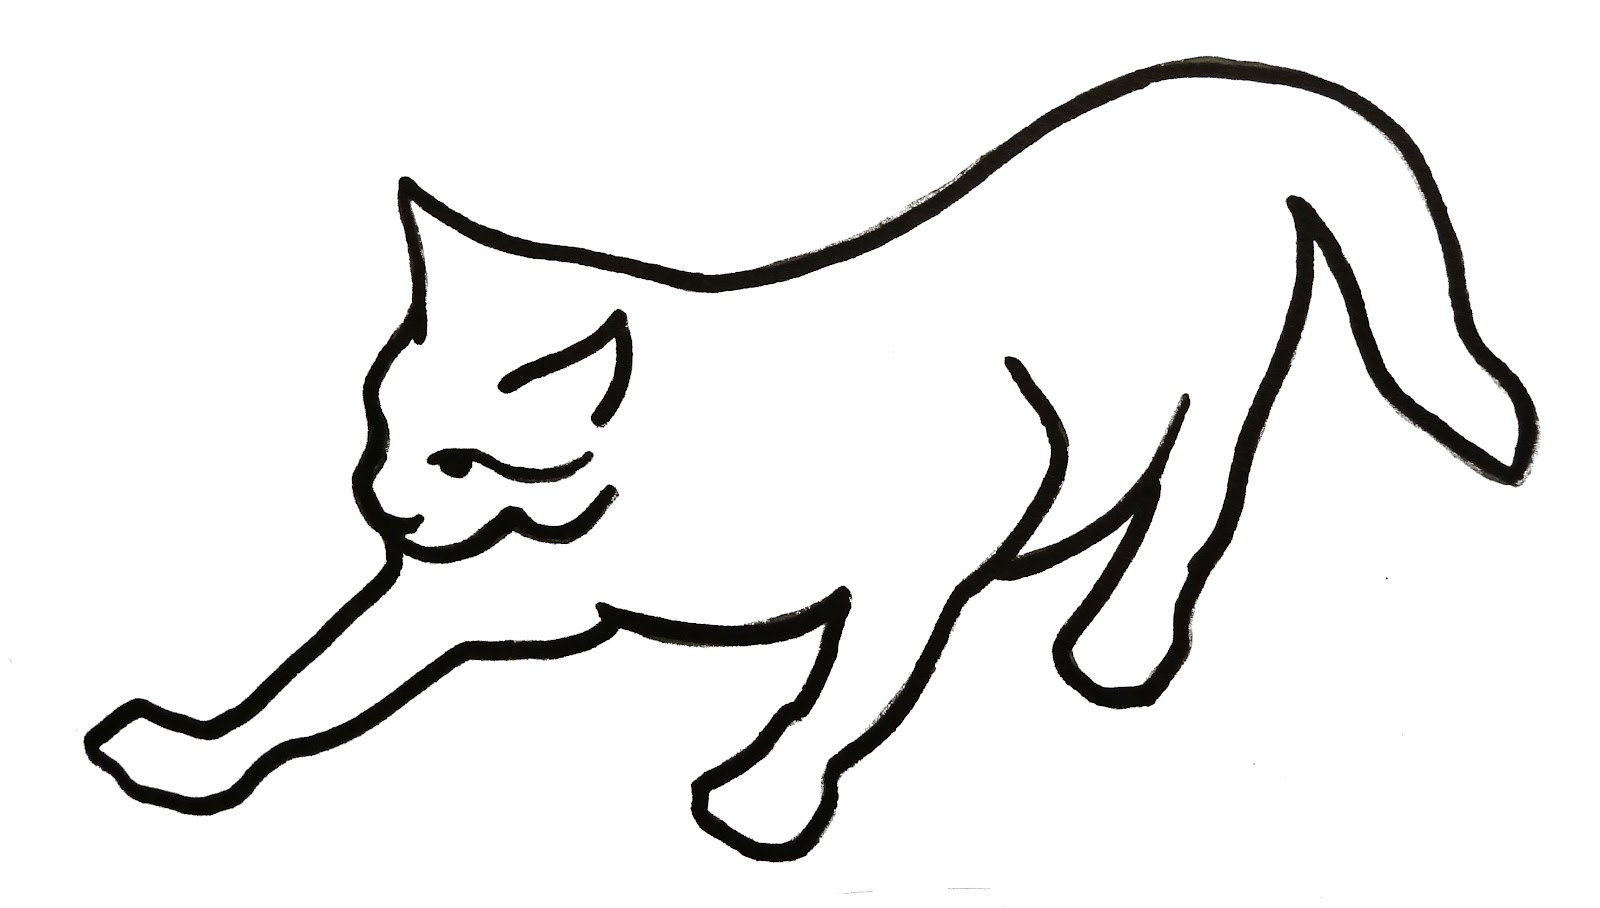 Cats Drawings - ClipArt Best